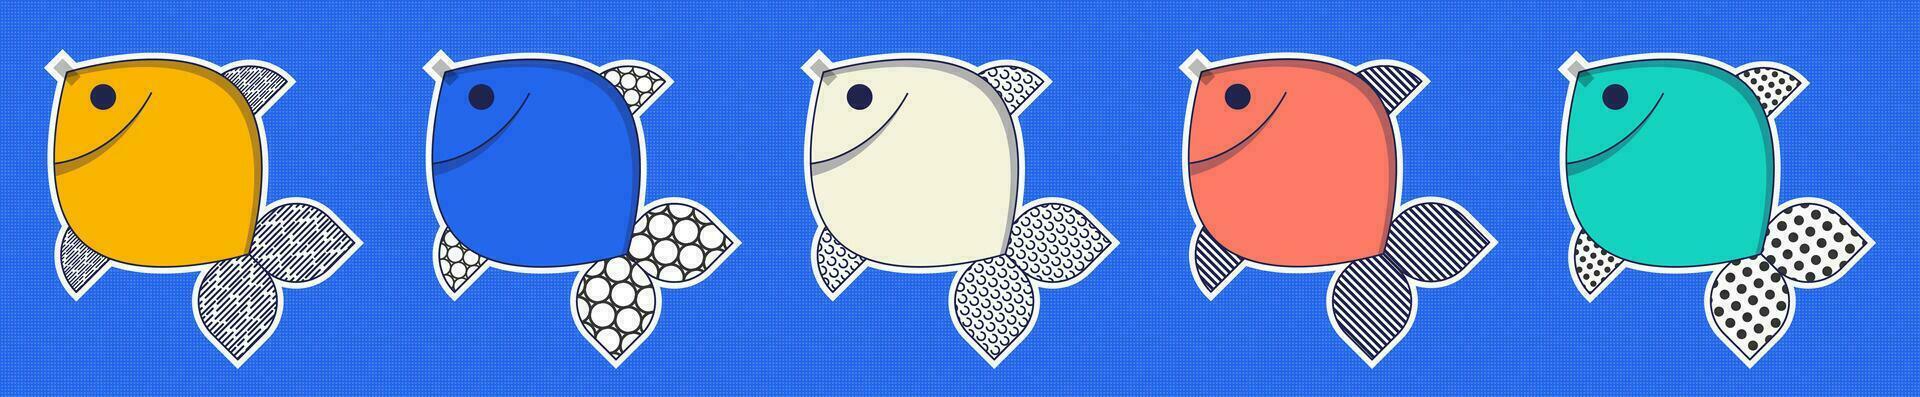 Poisson d'avril. French April Fool's Day stickers set fish. Flat style. Vector illustration